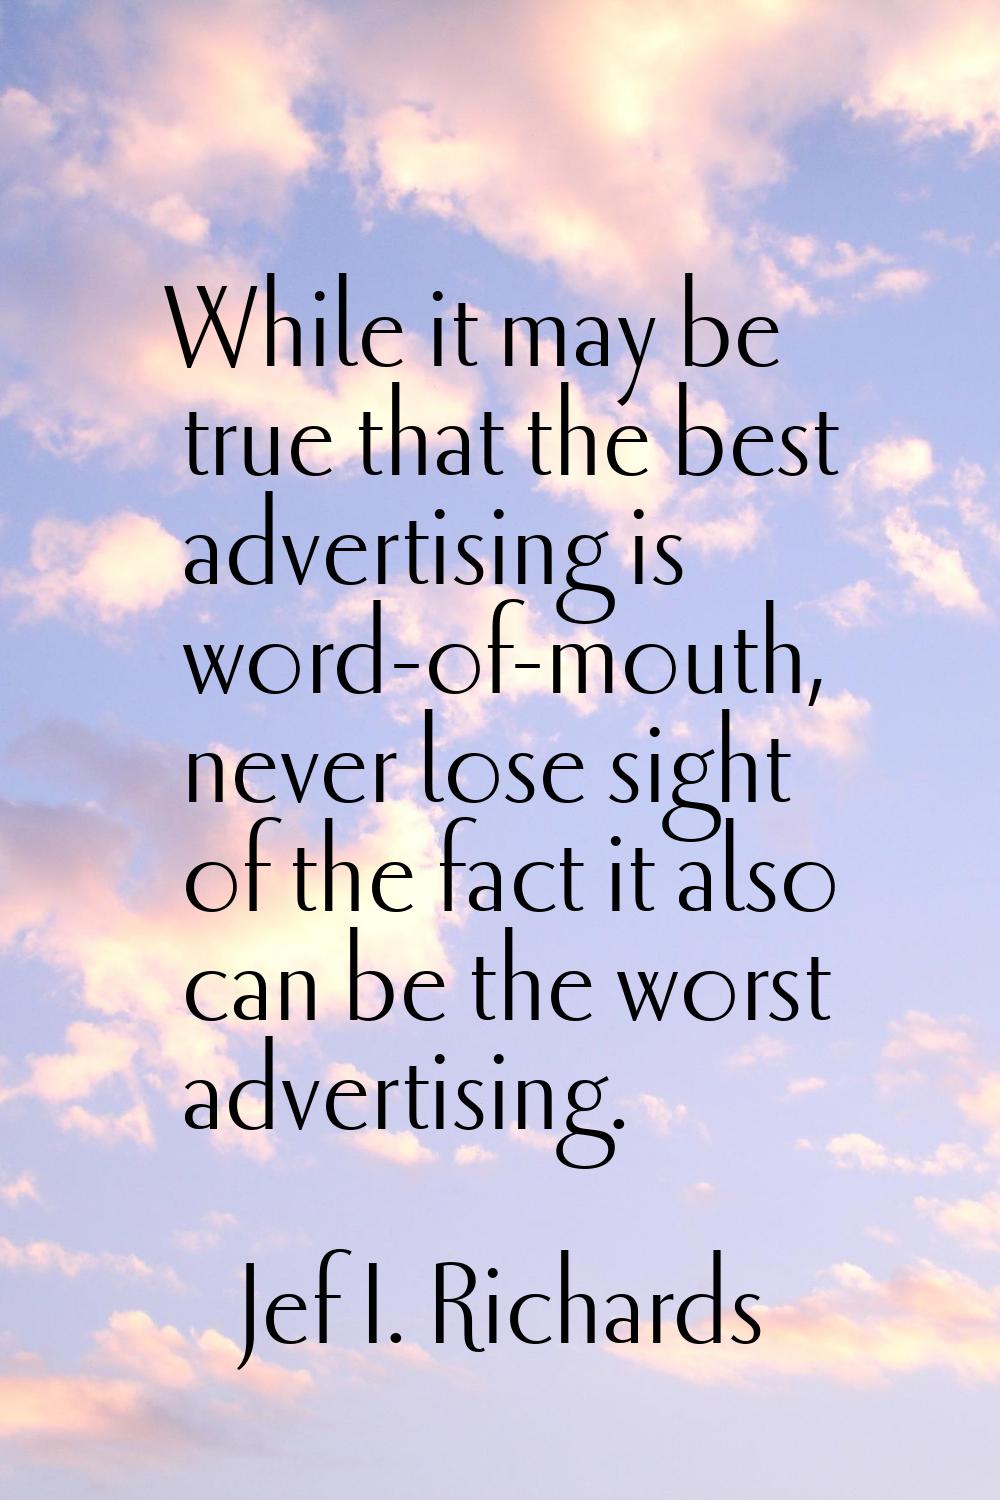 While it may be true that the best advertising is word-of-mouth, never lose sight of the fact it al